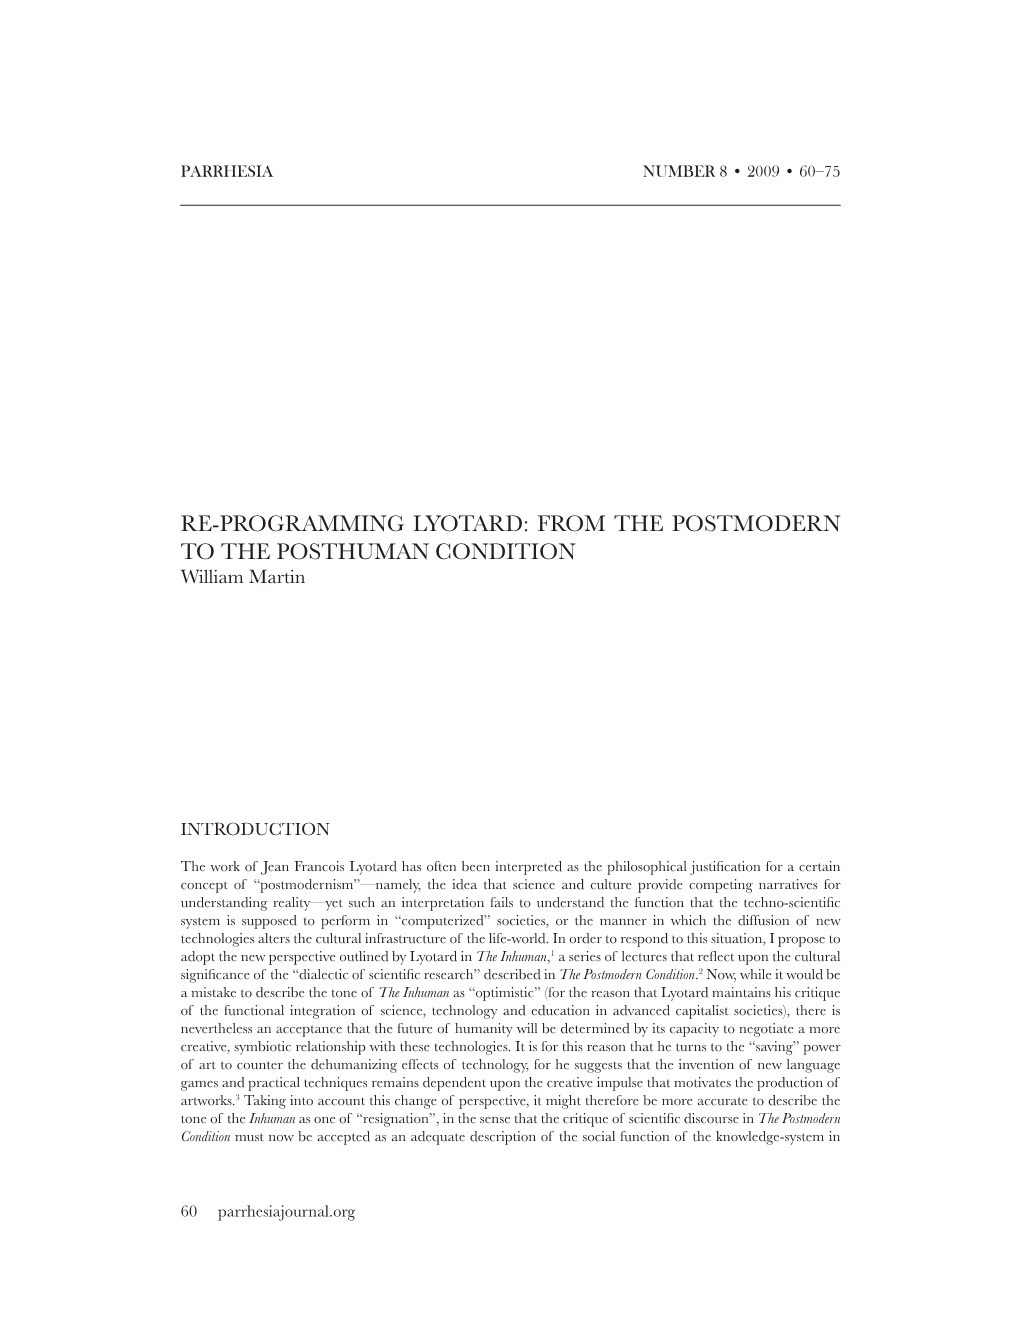 RE-PROGRAMMING LYOTARD: from the POSTMODERN to the POSTHUMAN CONDITION William Martin